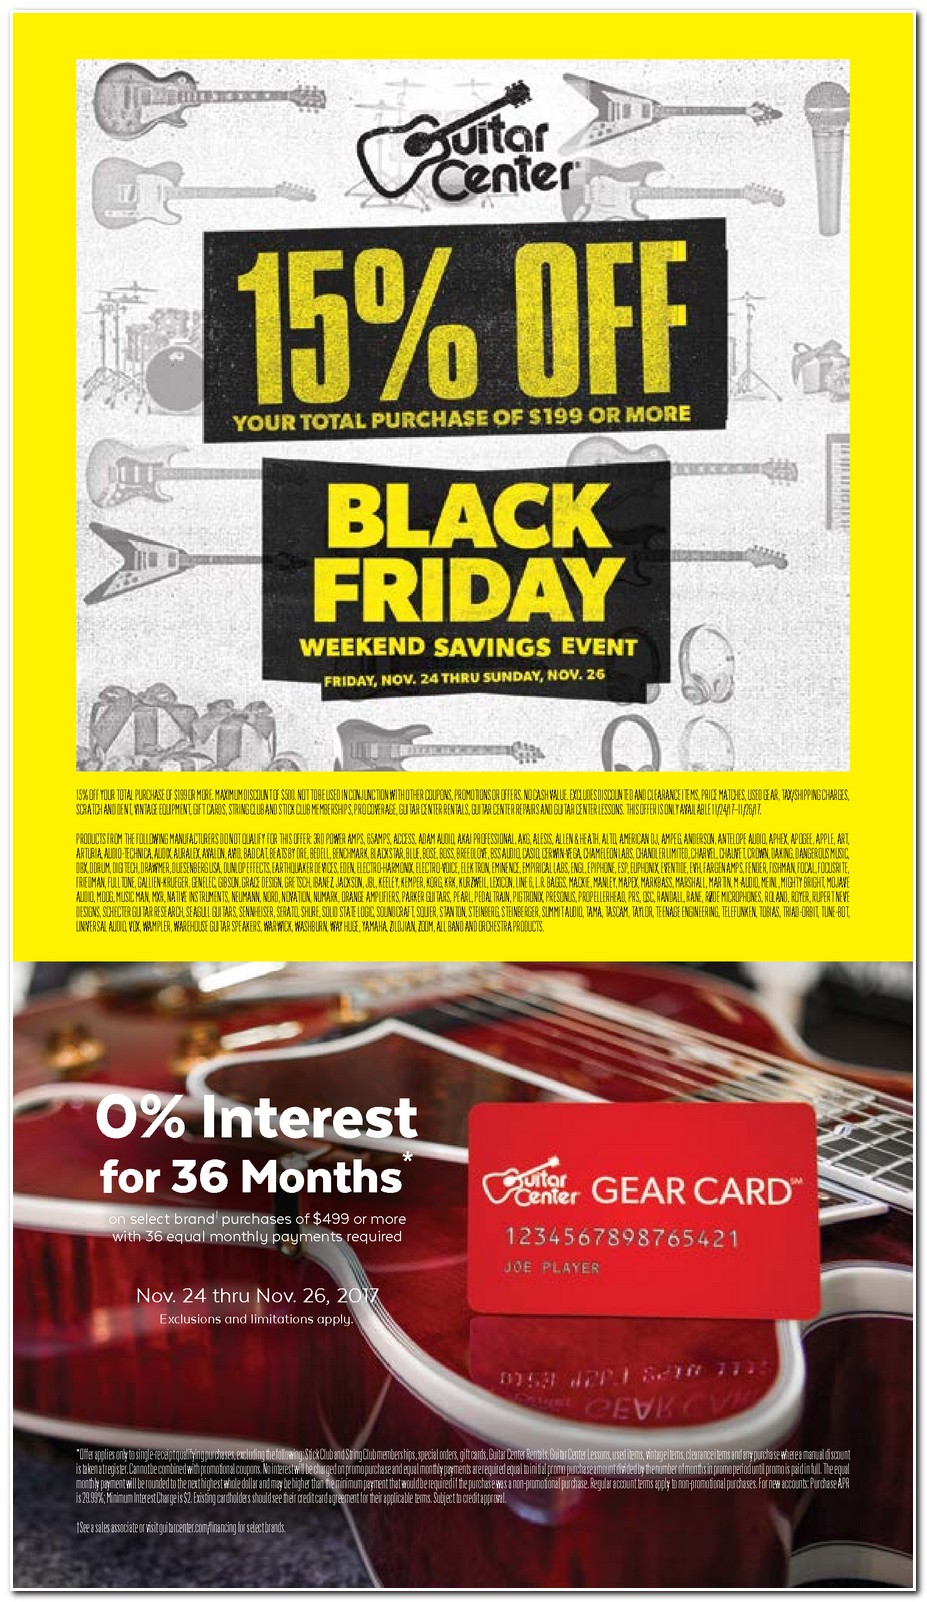 Guitar Center Black Friday Ads, Sales, and Deals 2017, Promo Codes